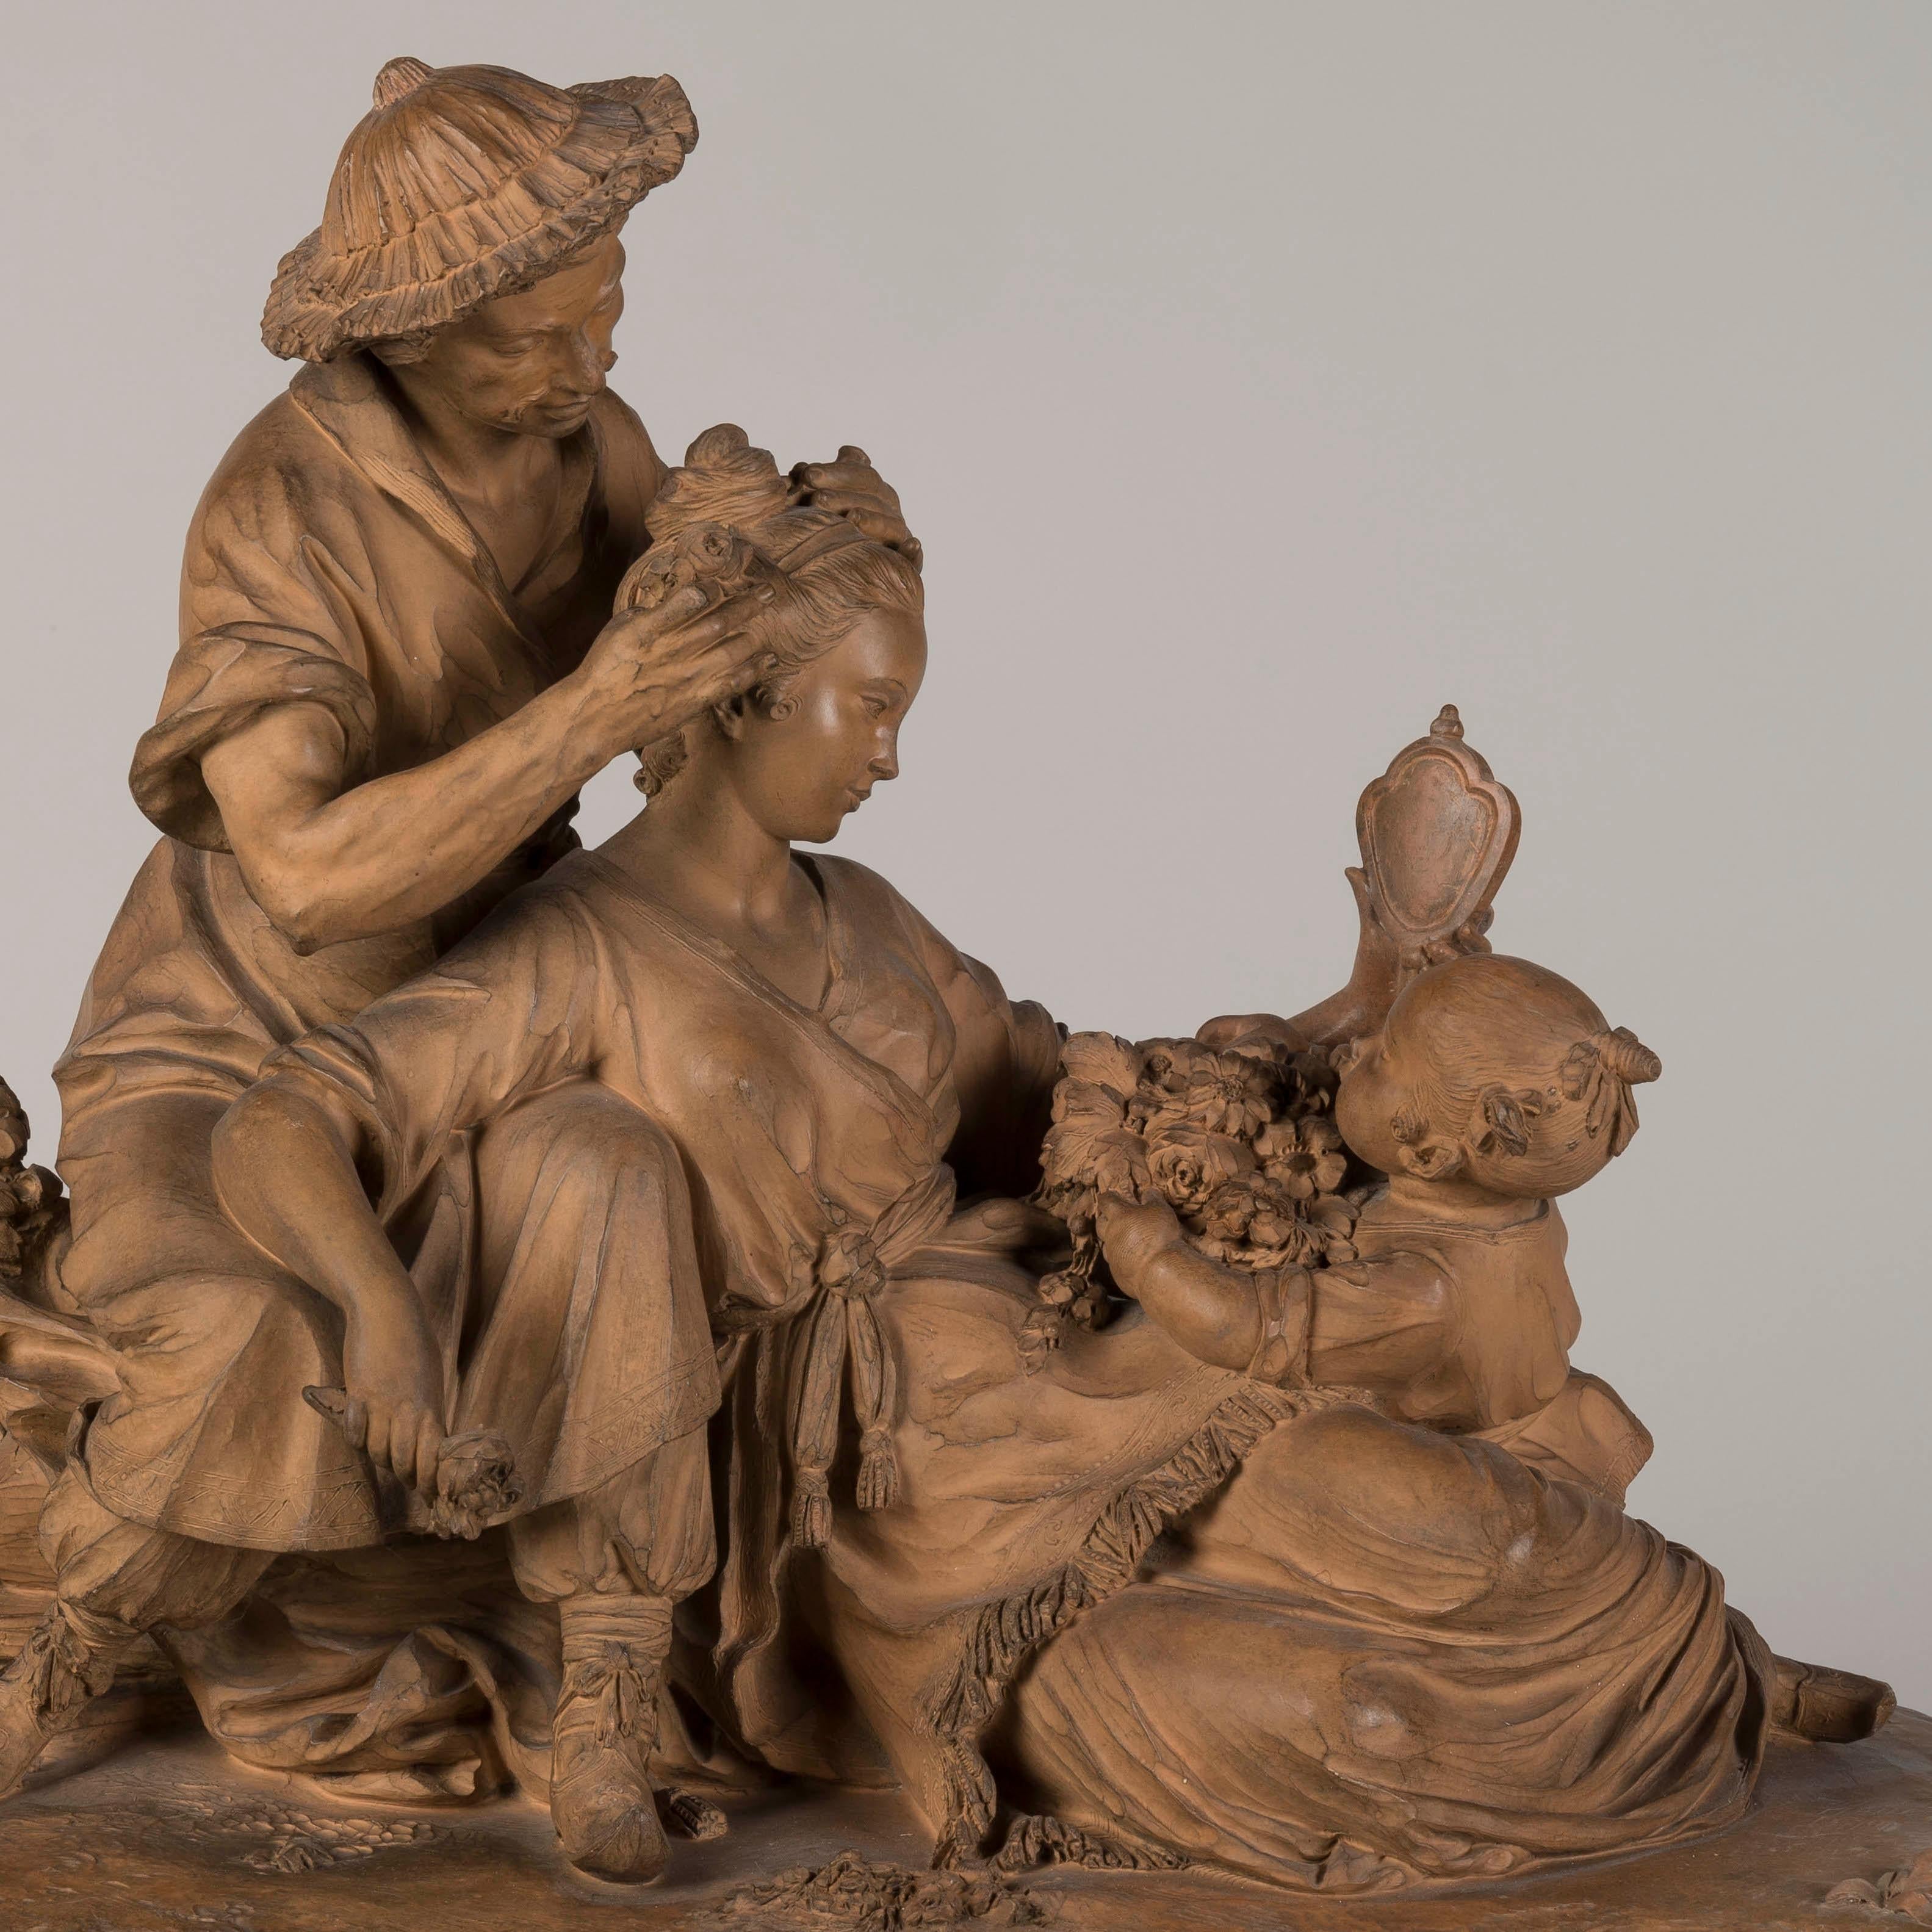 A Chinoiserie Sculptural Group
After François Boucher

This refined terracotta sculpture of a lady at her toilette was a popular motif first depicted in a painting by François Boucher, dated 1742, and known as 